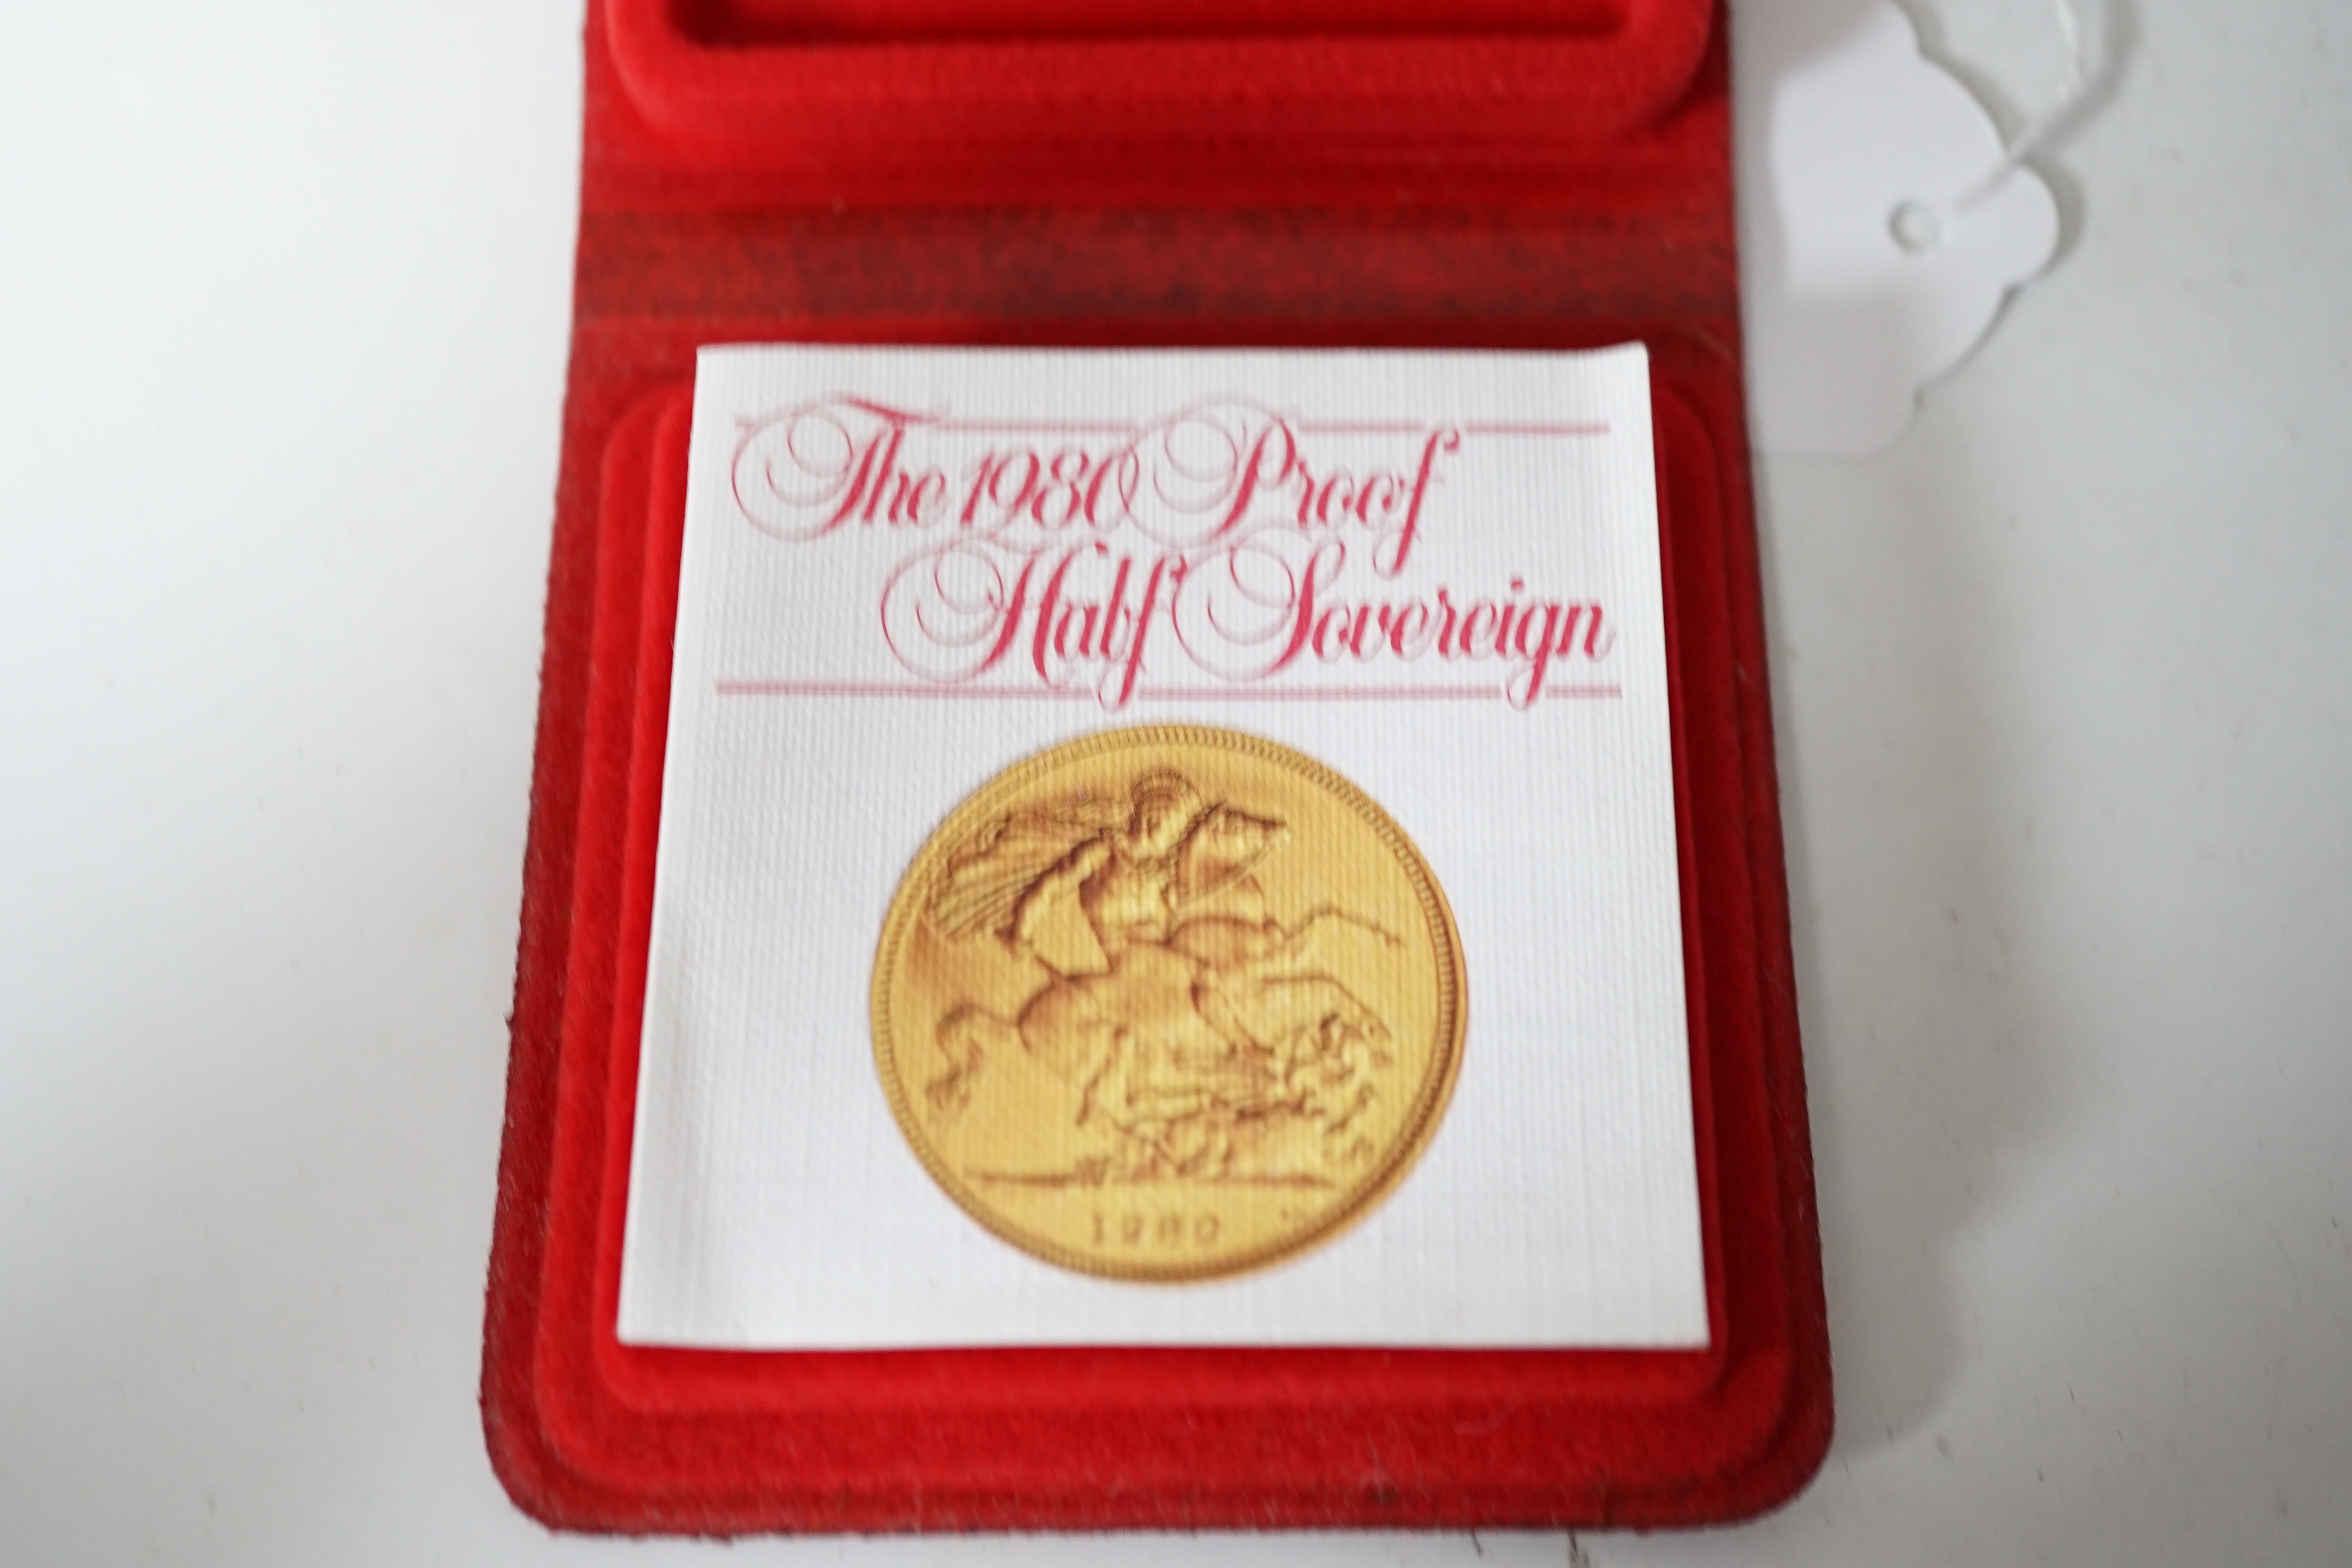 British gold coins, 1980 QEII proof gold half sovereign, in case of issue with certificate